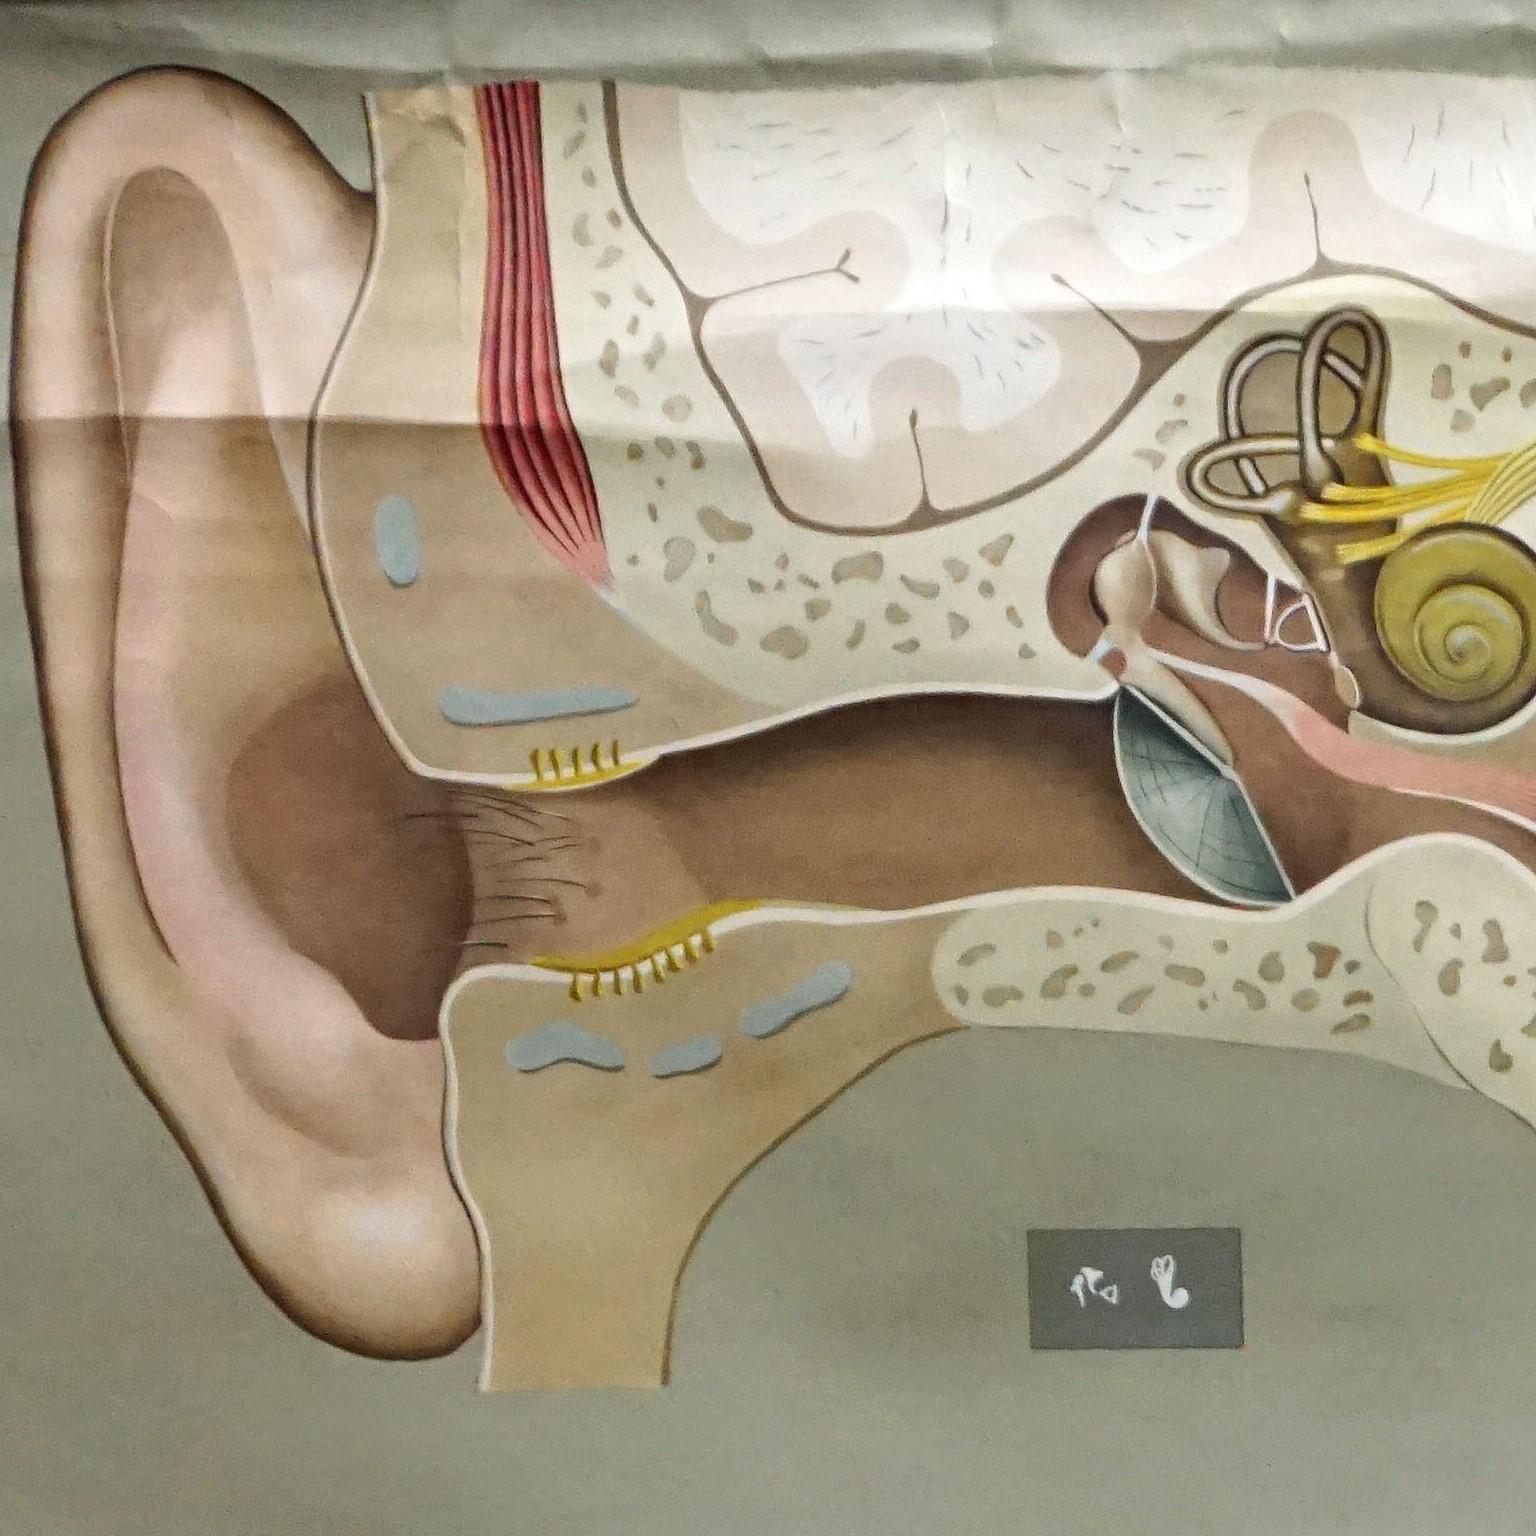 A medical pull-down wall chart poster illustrating the hearing, the human ear and the sense of balance, published by Hagemann, Duesseldorf. Colorful print on paper reinforced with canvas.
Measurements:
Width 167 cm (65.75 inch)
Height 114 cm